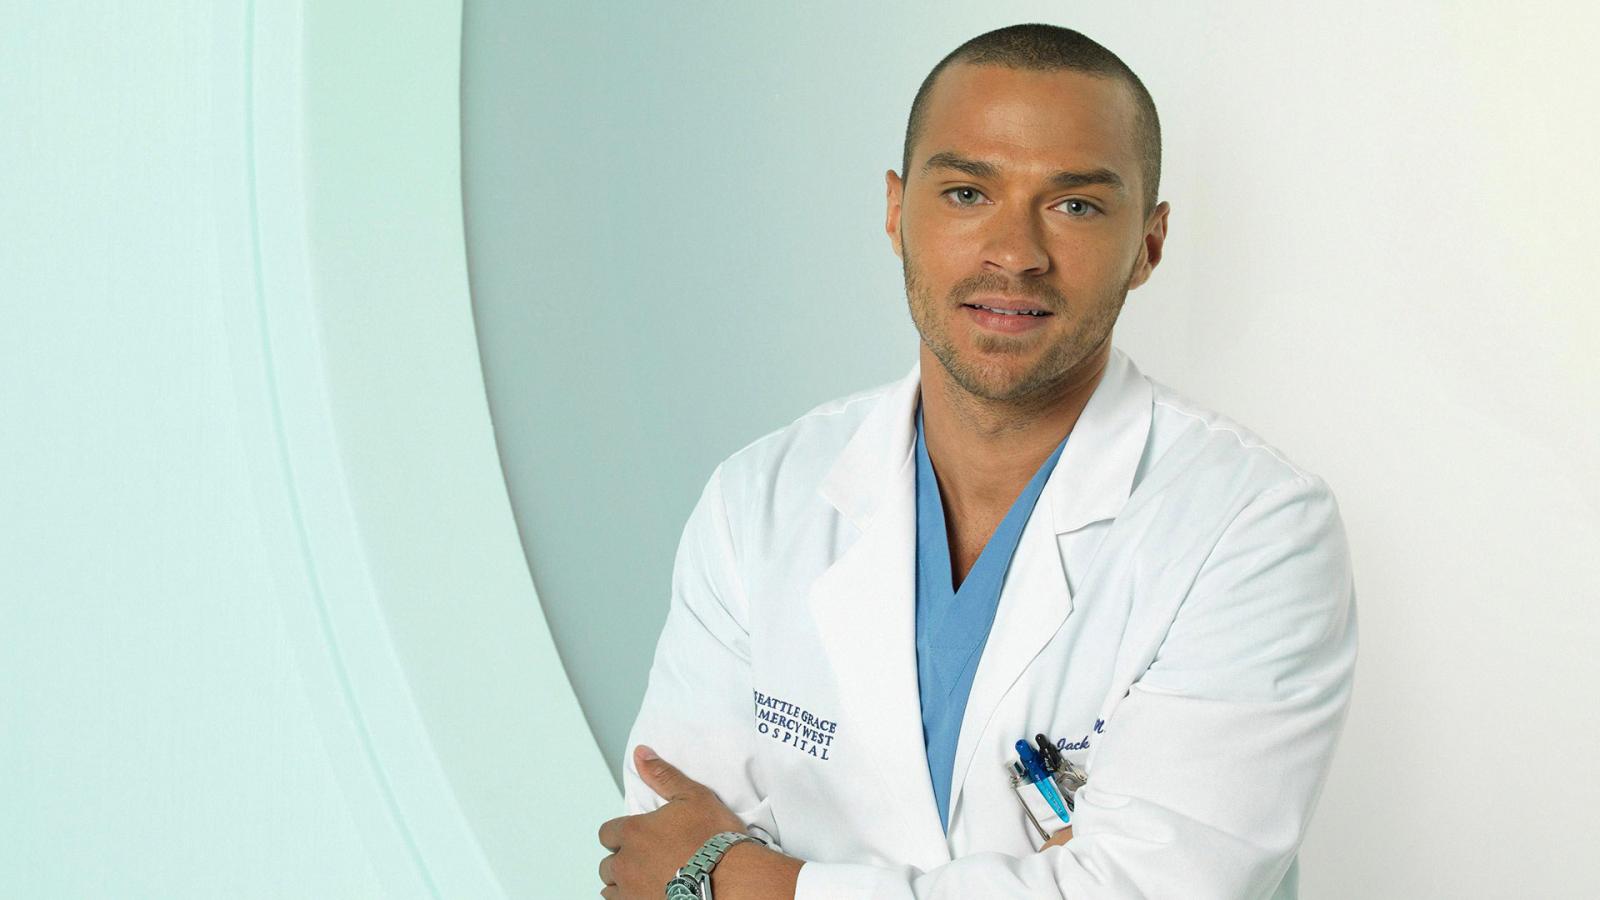 Move Over, McDreamy: Ranking the 8 Hottest Male Doctors on TV - image 6